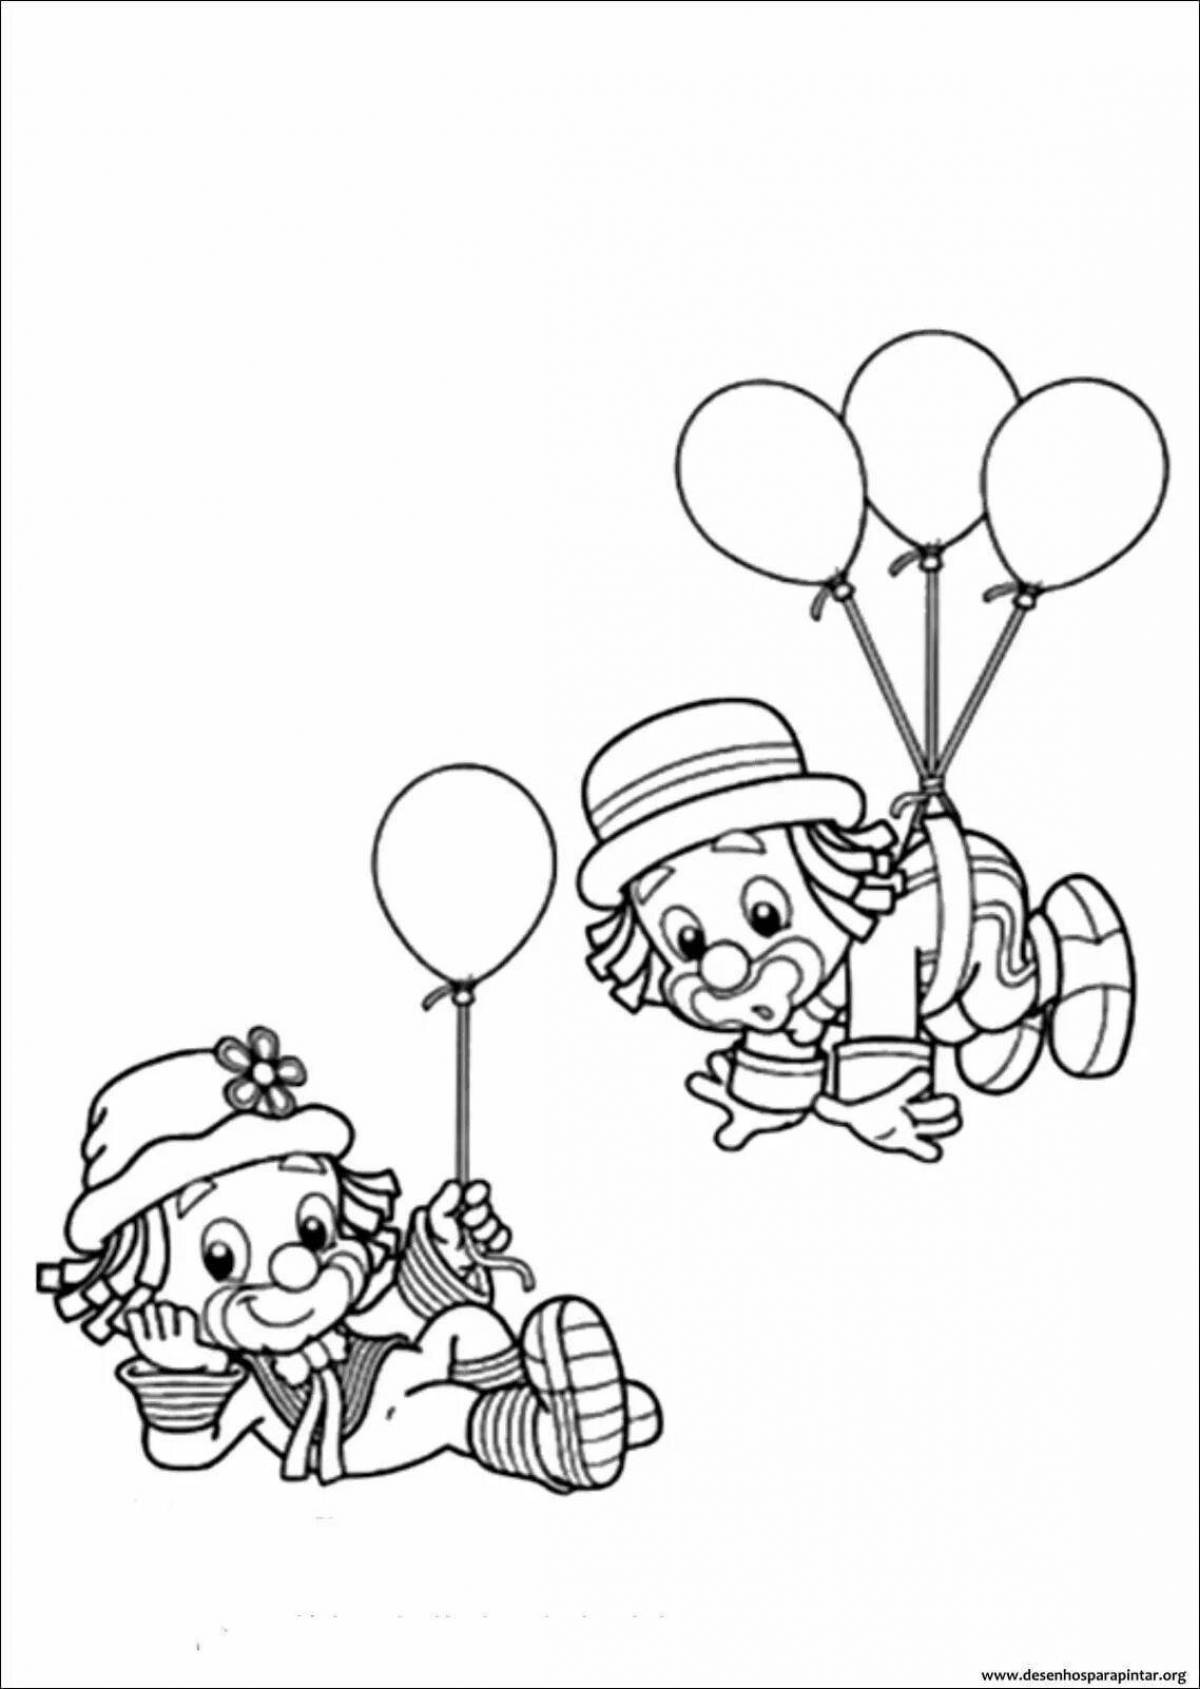 Bright clown with balloons